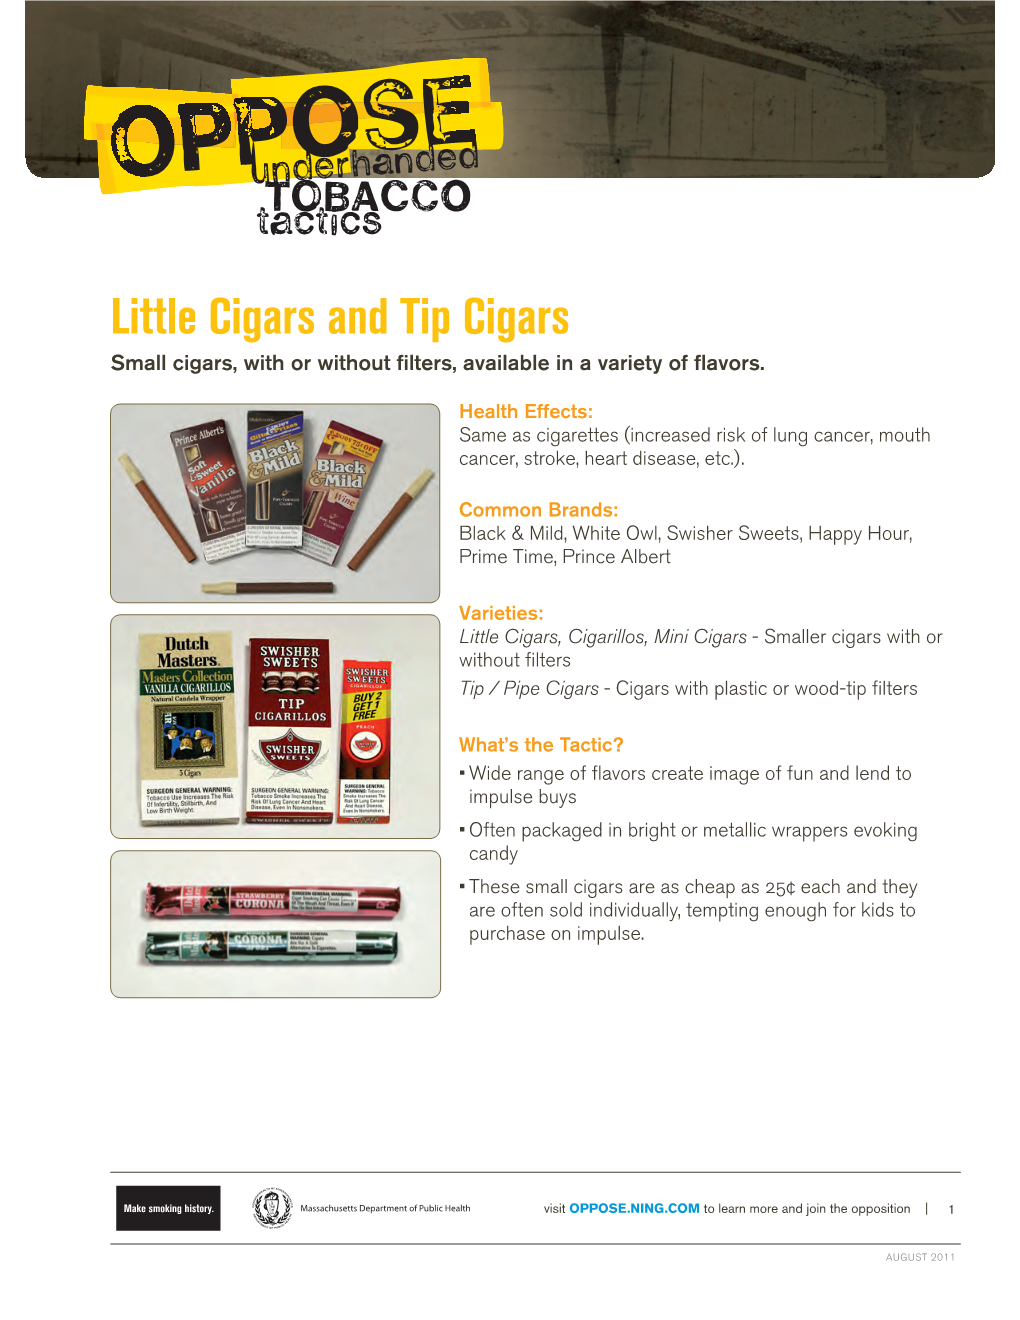 Little Cigars and Tip Cigars Small Cigars, with Or Without Filters, Available in a Variety of Flavors